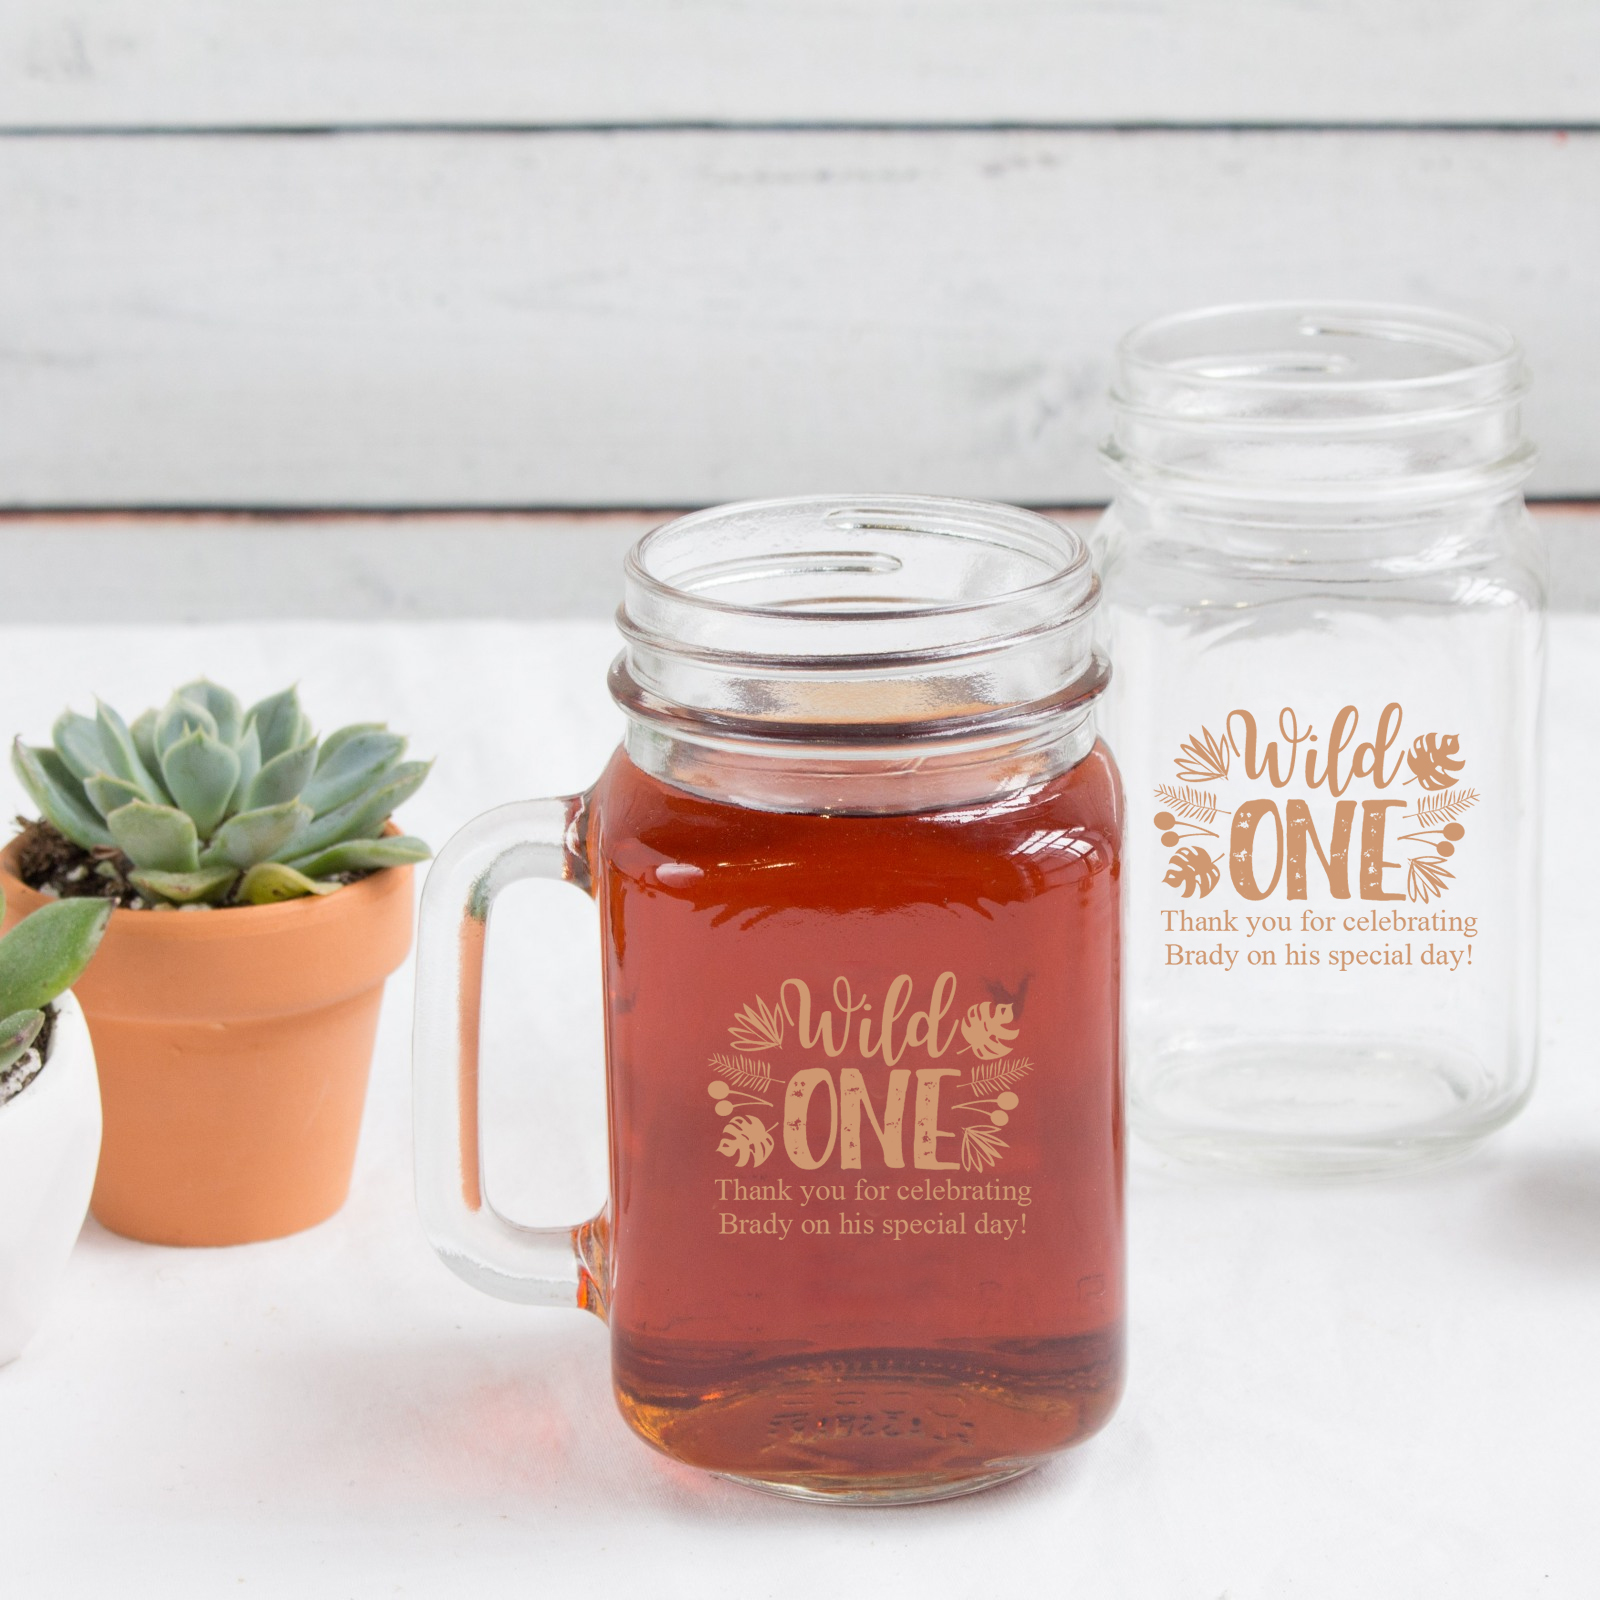 Friendship Thank You For Standing By My Side - Personalized Mason Jar –  Macorner